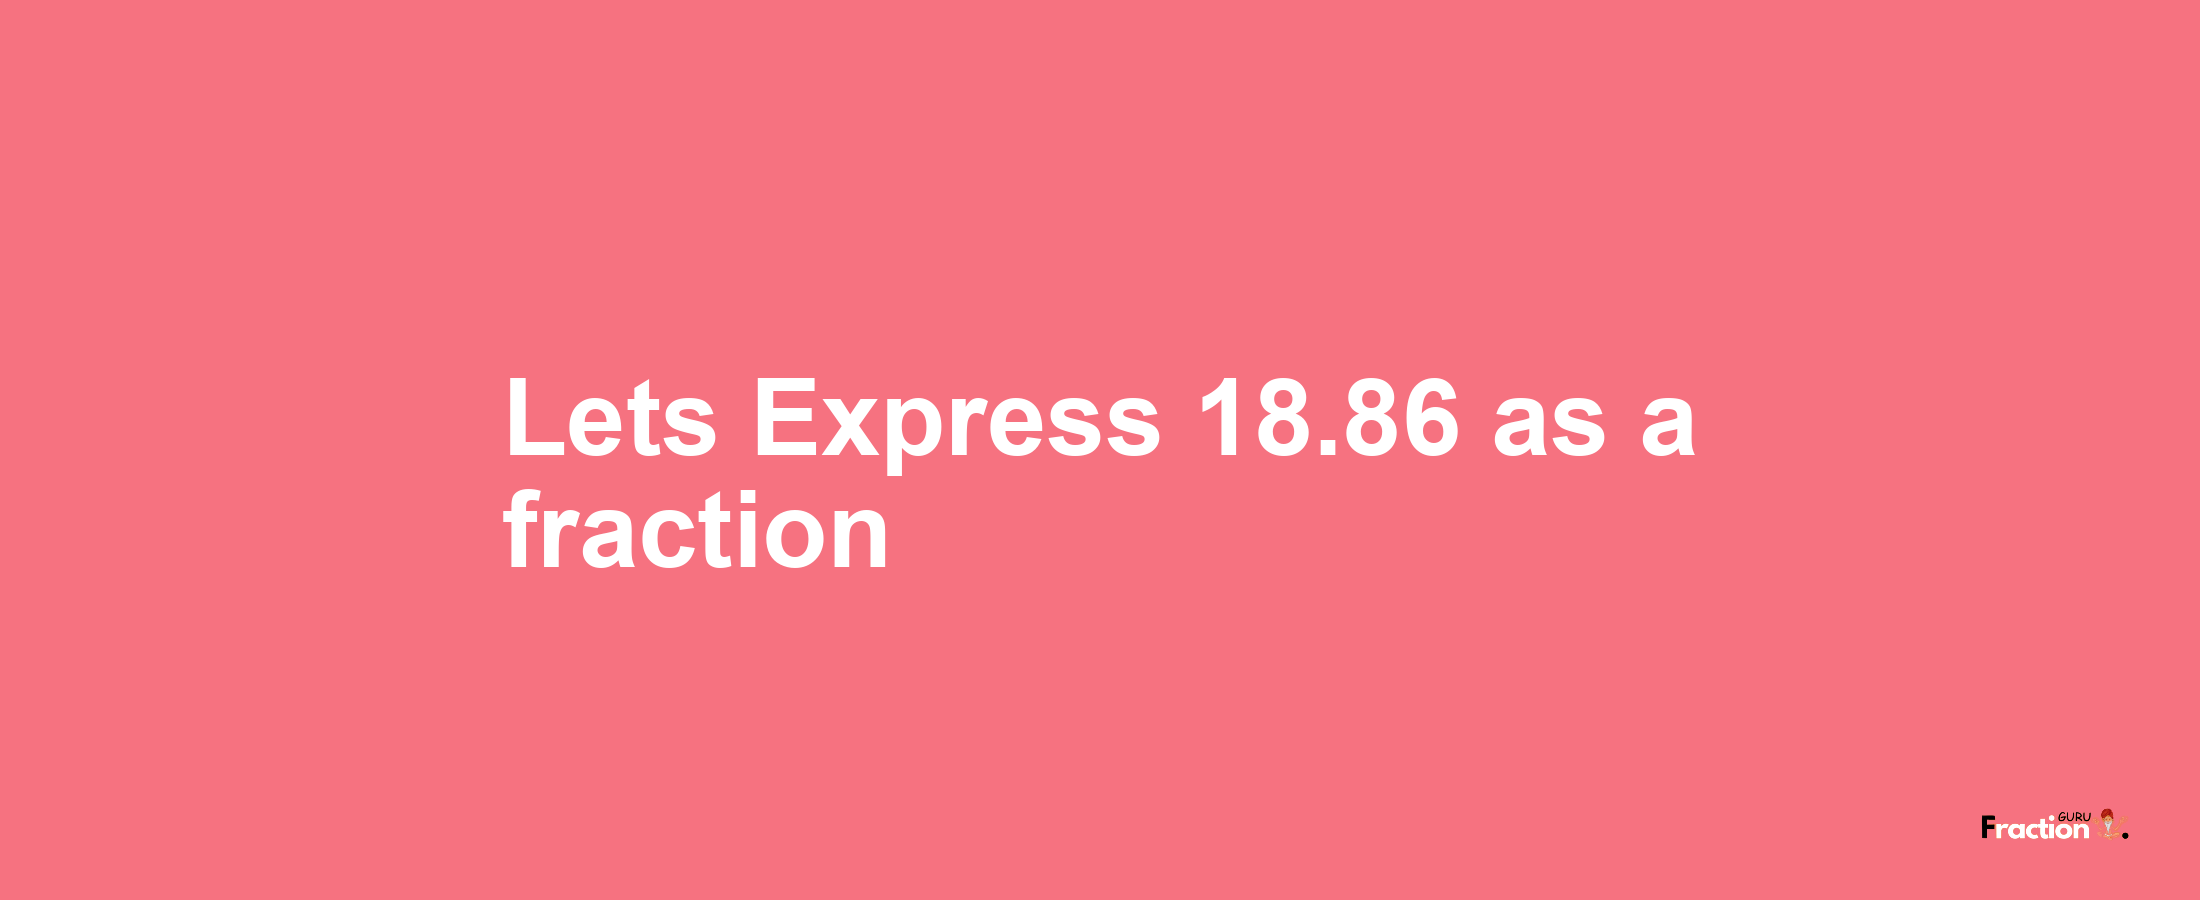 Lets Express 18.86 as afraction